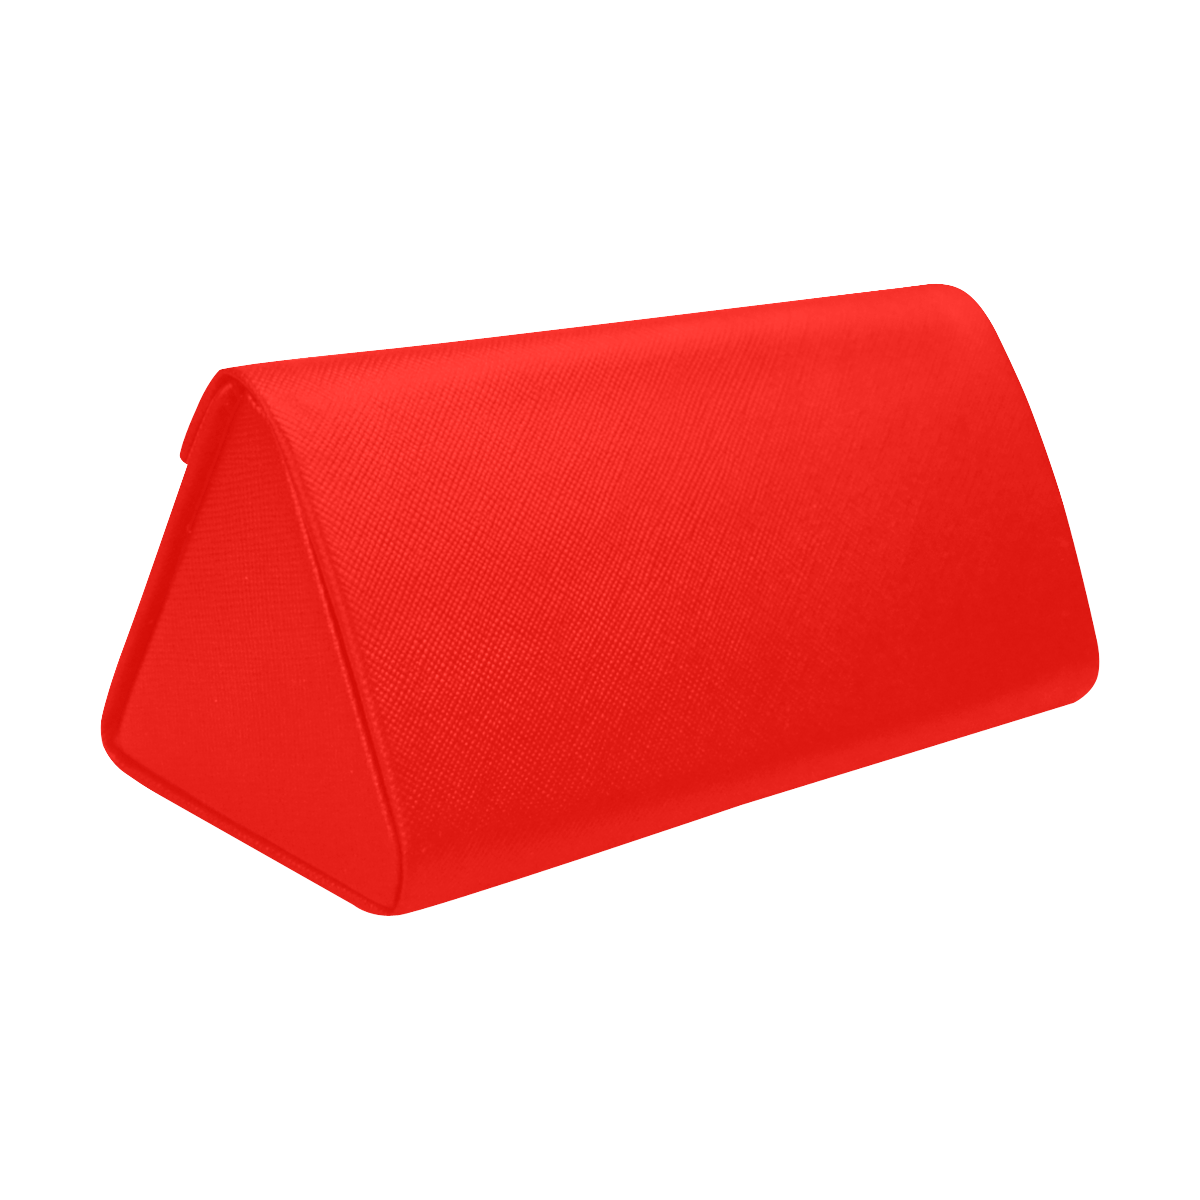 color candy apple red Custom Foldable Glasses Case